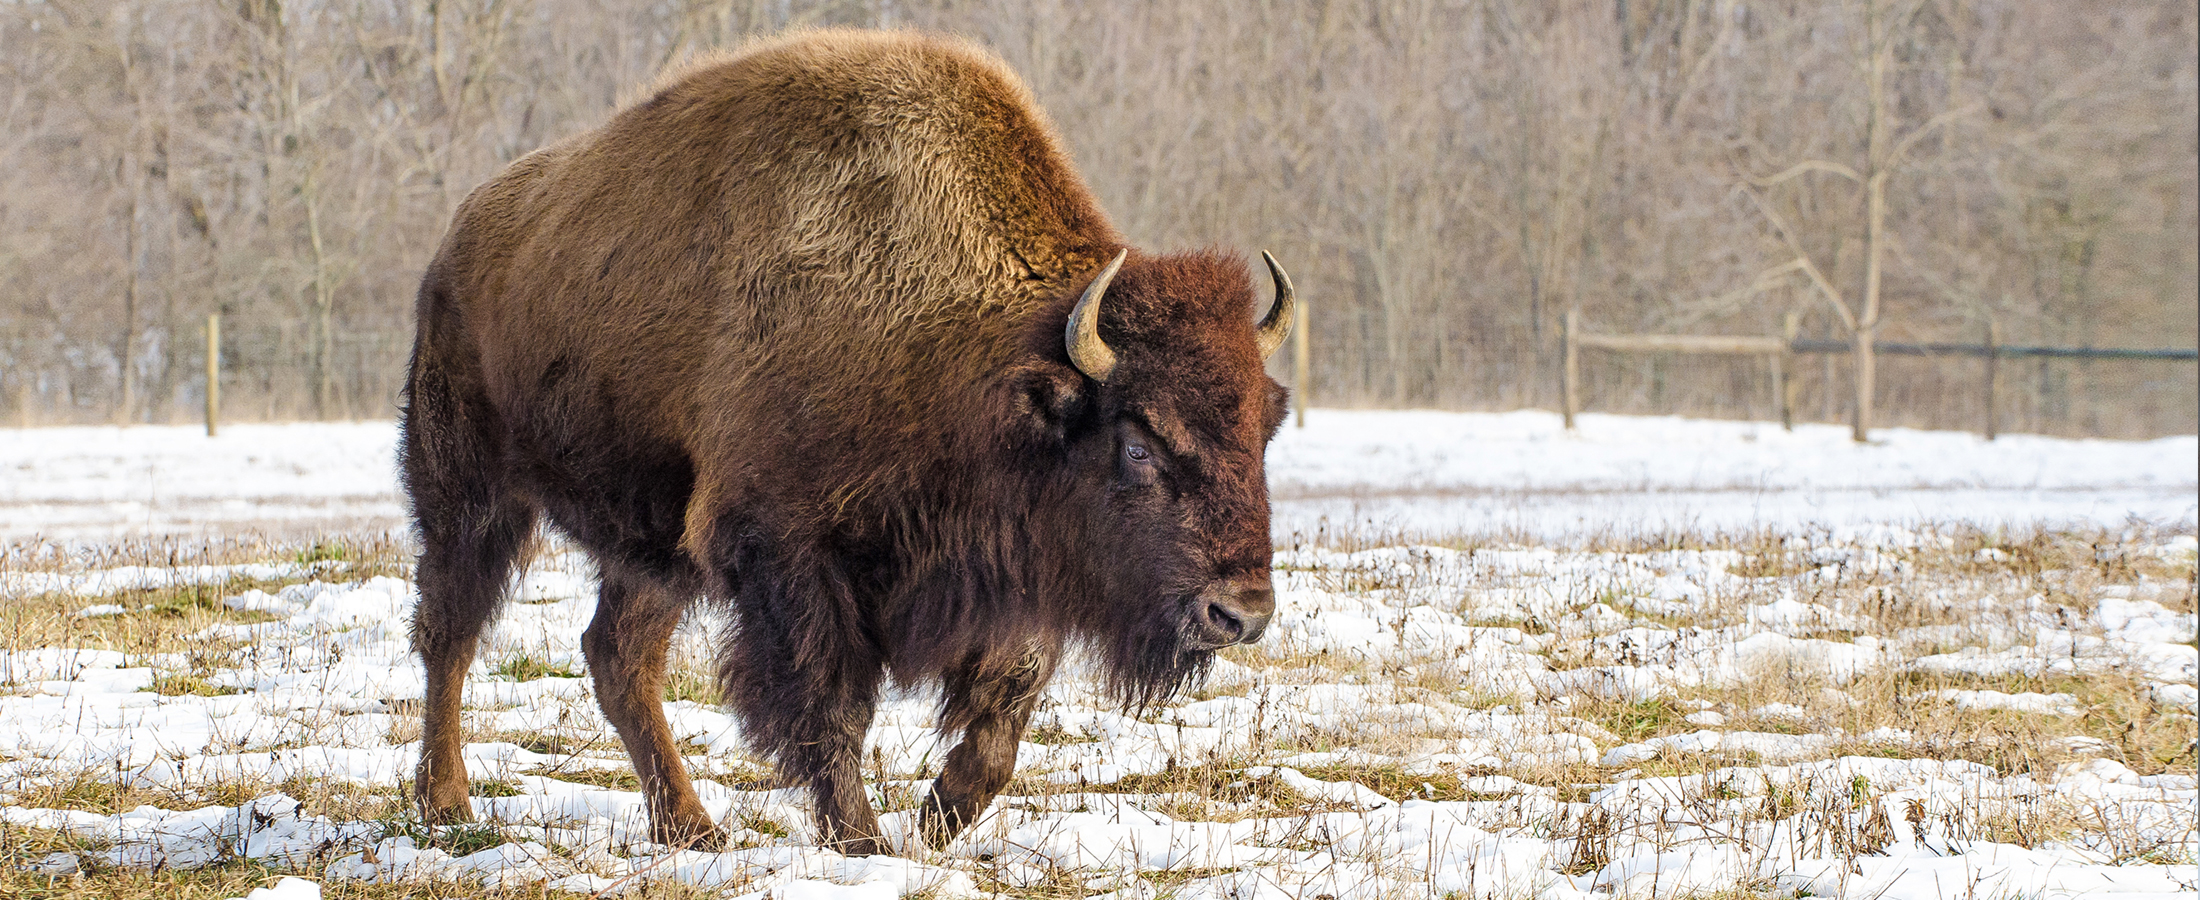 Bison in field on snowy day at Battelle Darby Creek